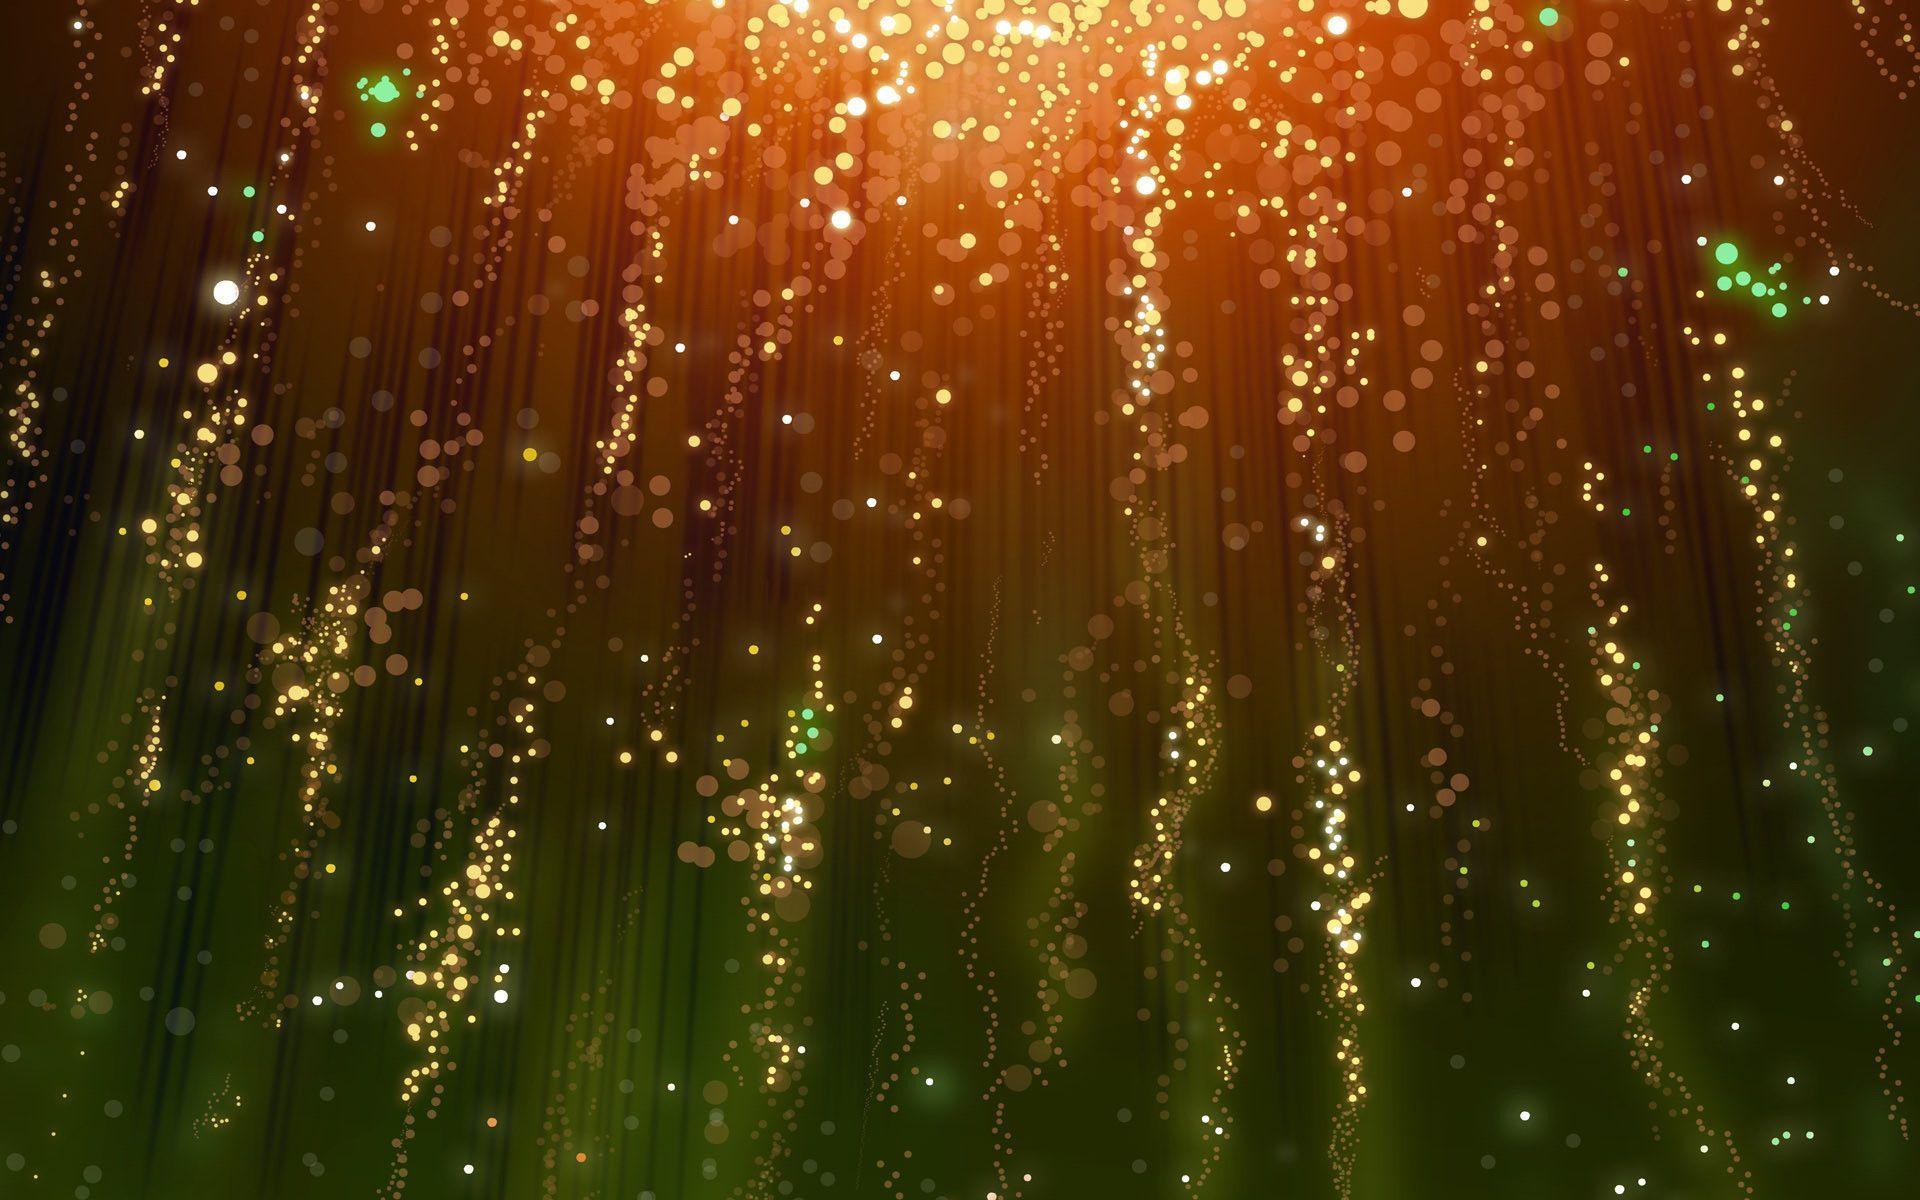 Abstract Shine Wallpaper For